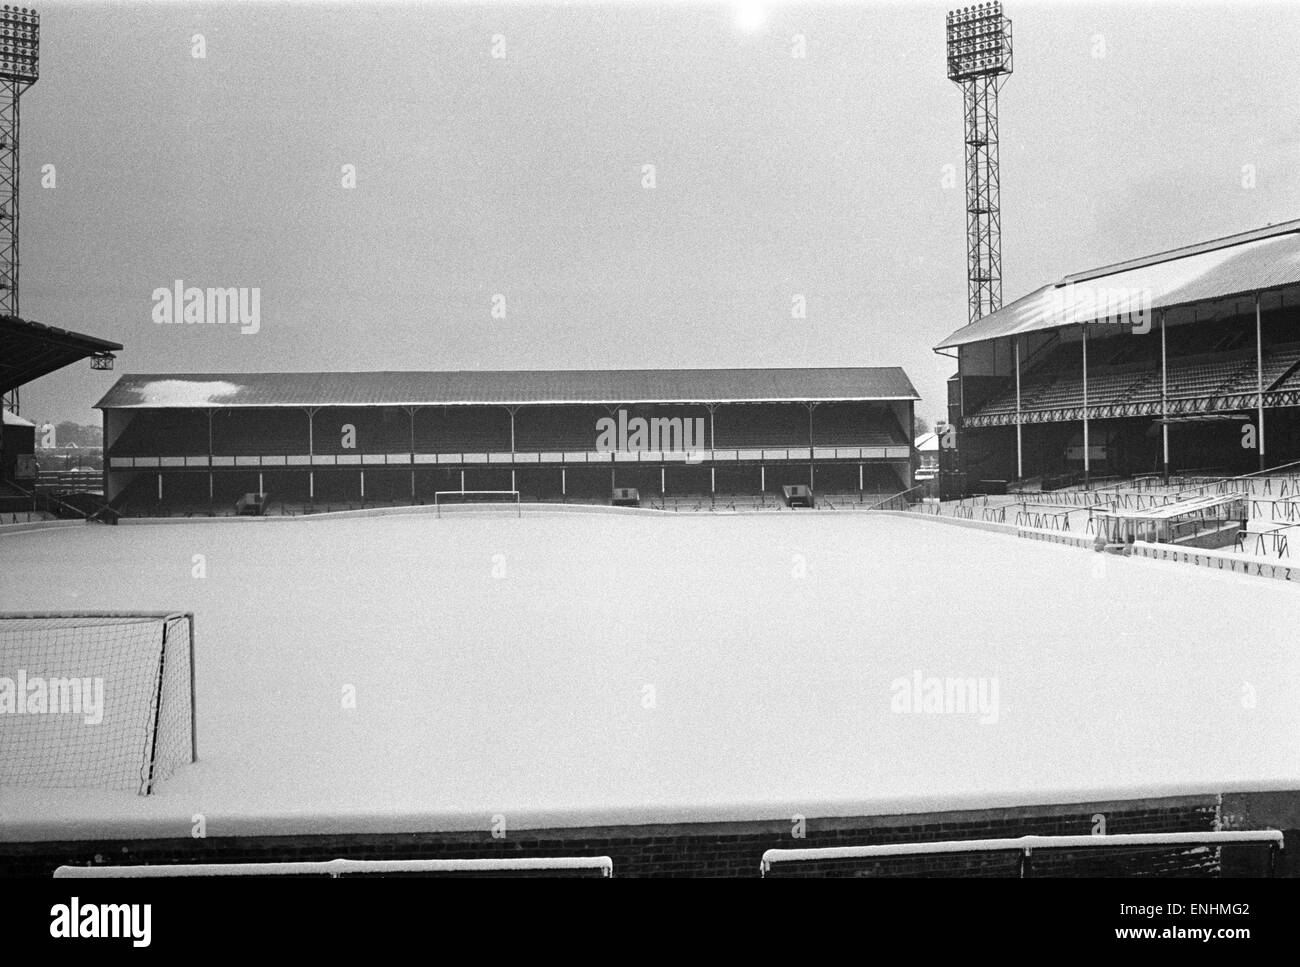 goodison-park-home-ground-of-everton-football-club-covered-in-snow-ENHMG2.jpg